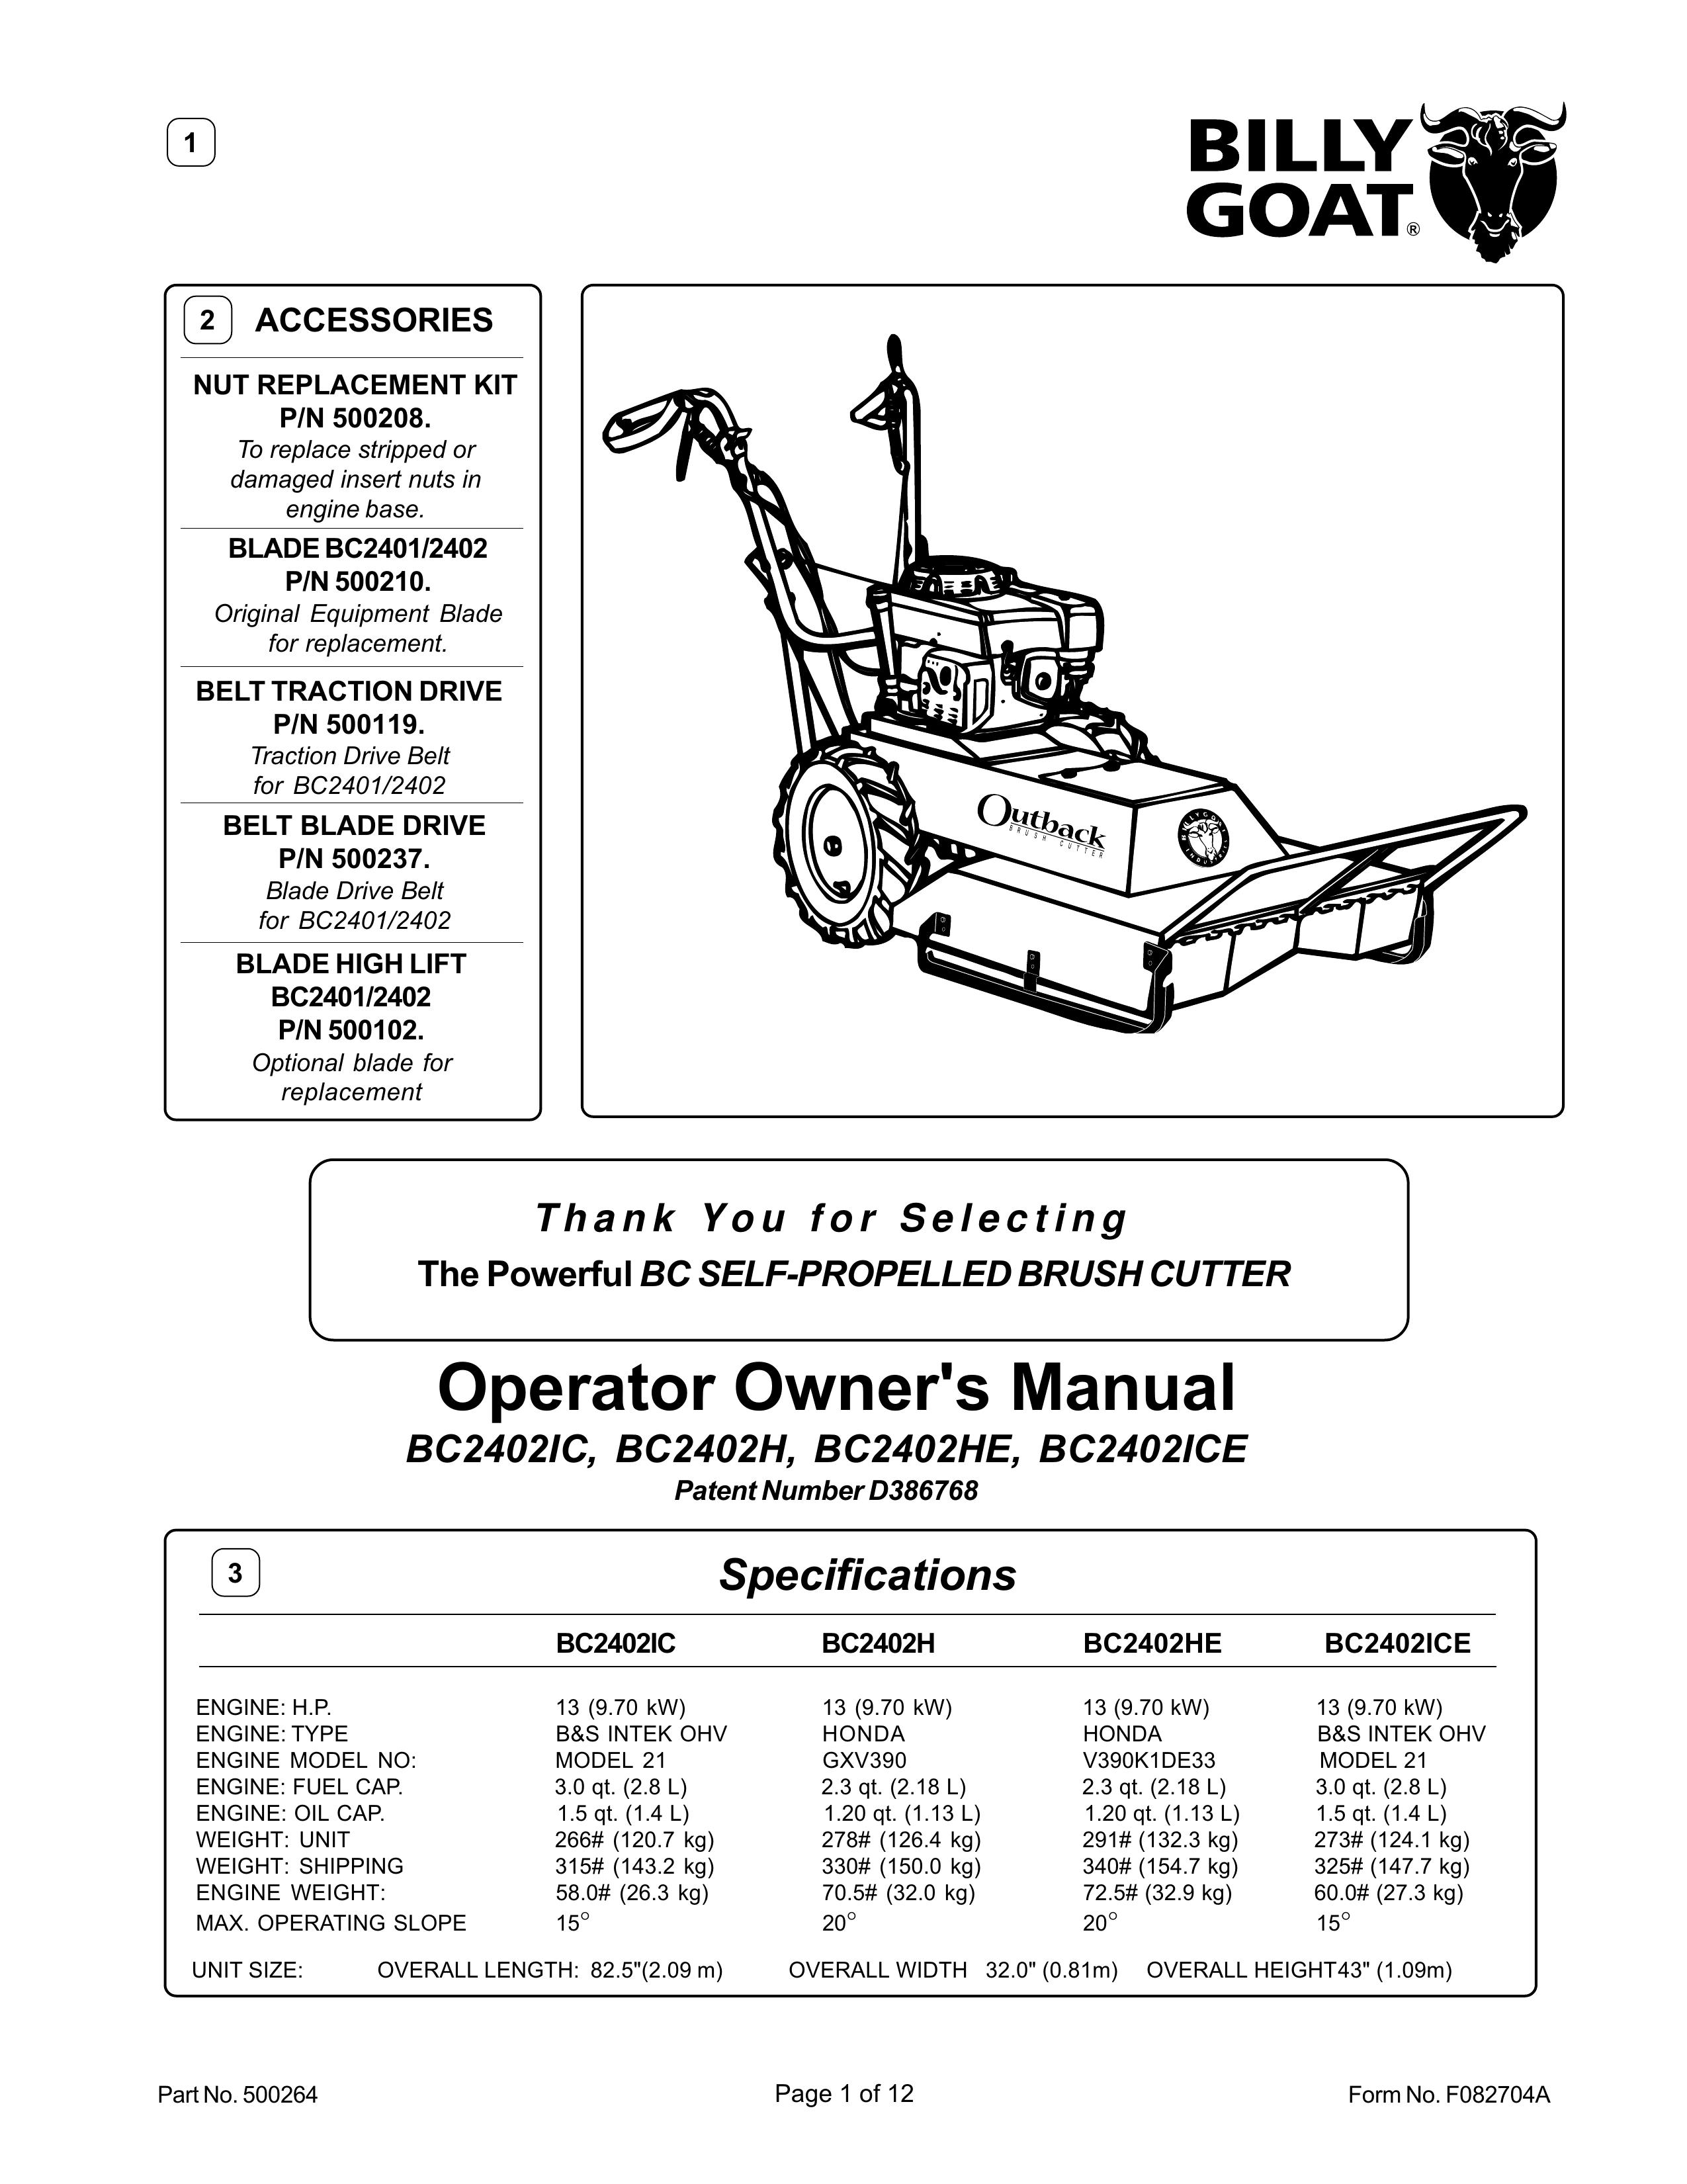 Billy Goat BC2402IC, BC2402H, BC2402HE, BC2402ICE Brush Cutter User Manual (Page 1)